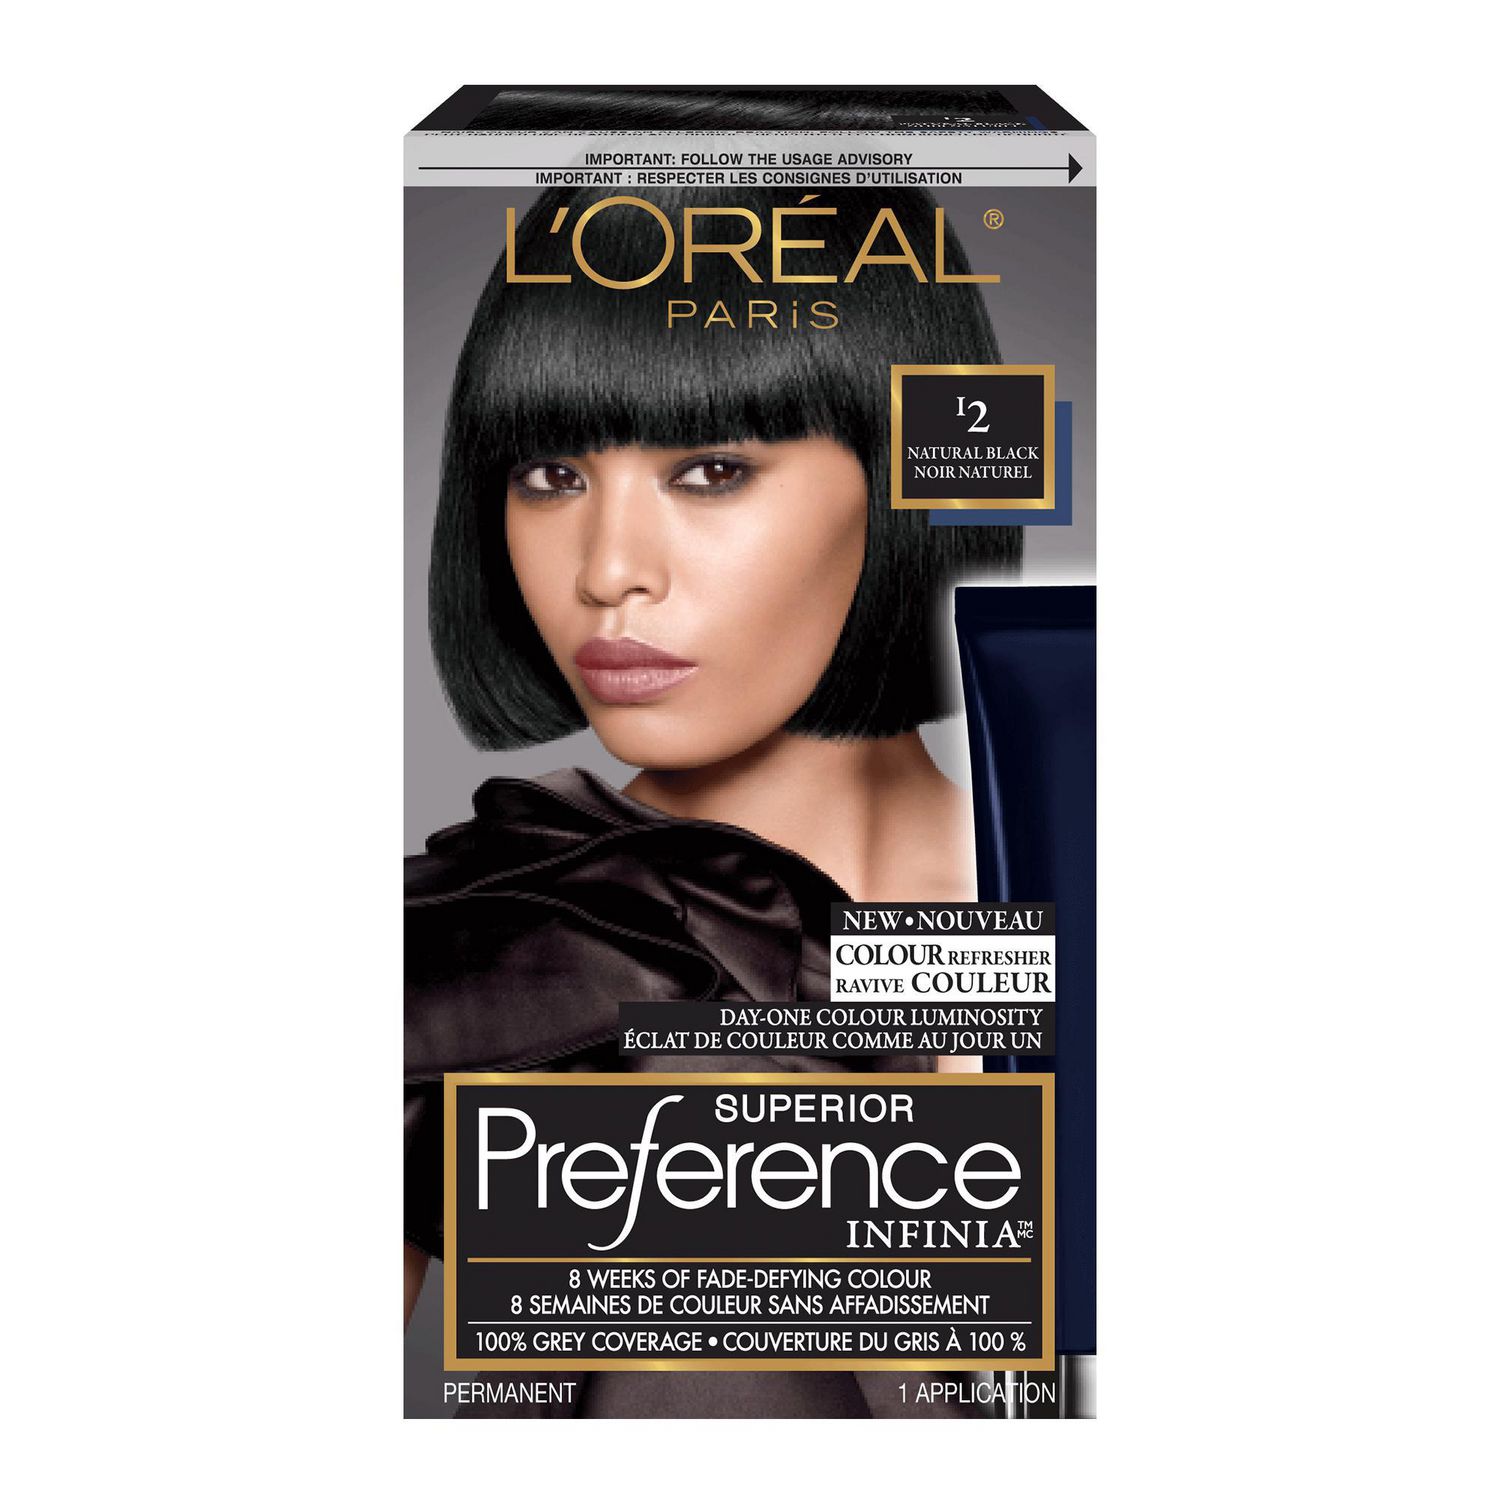 Loreal Preference Hair Color 4M ~ prissidesigns